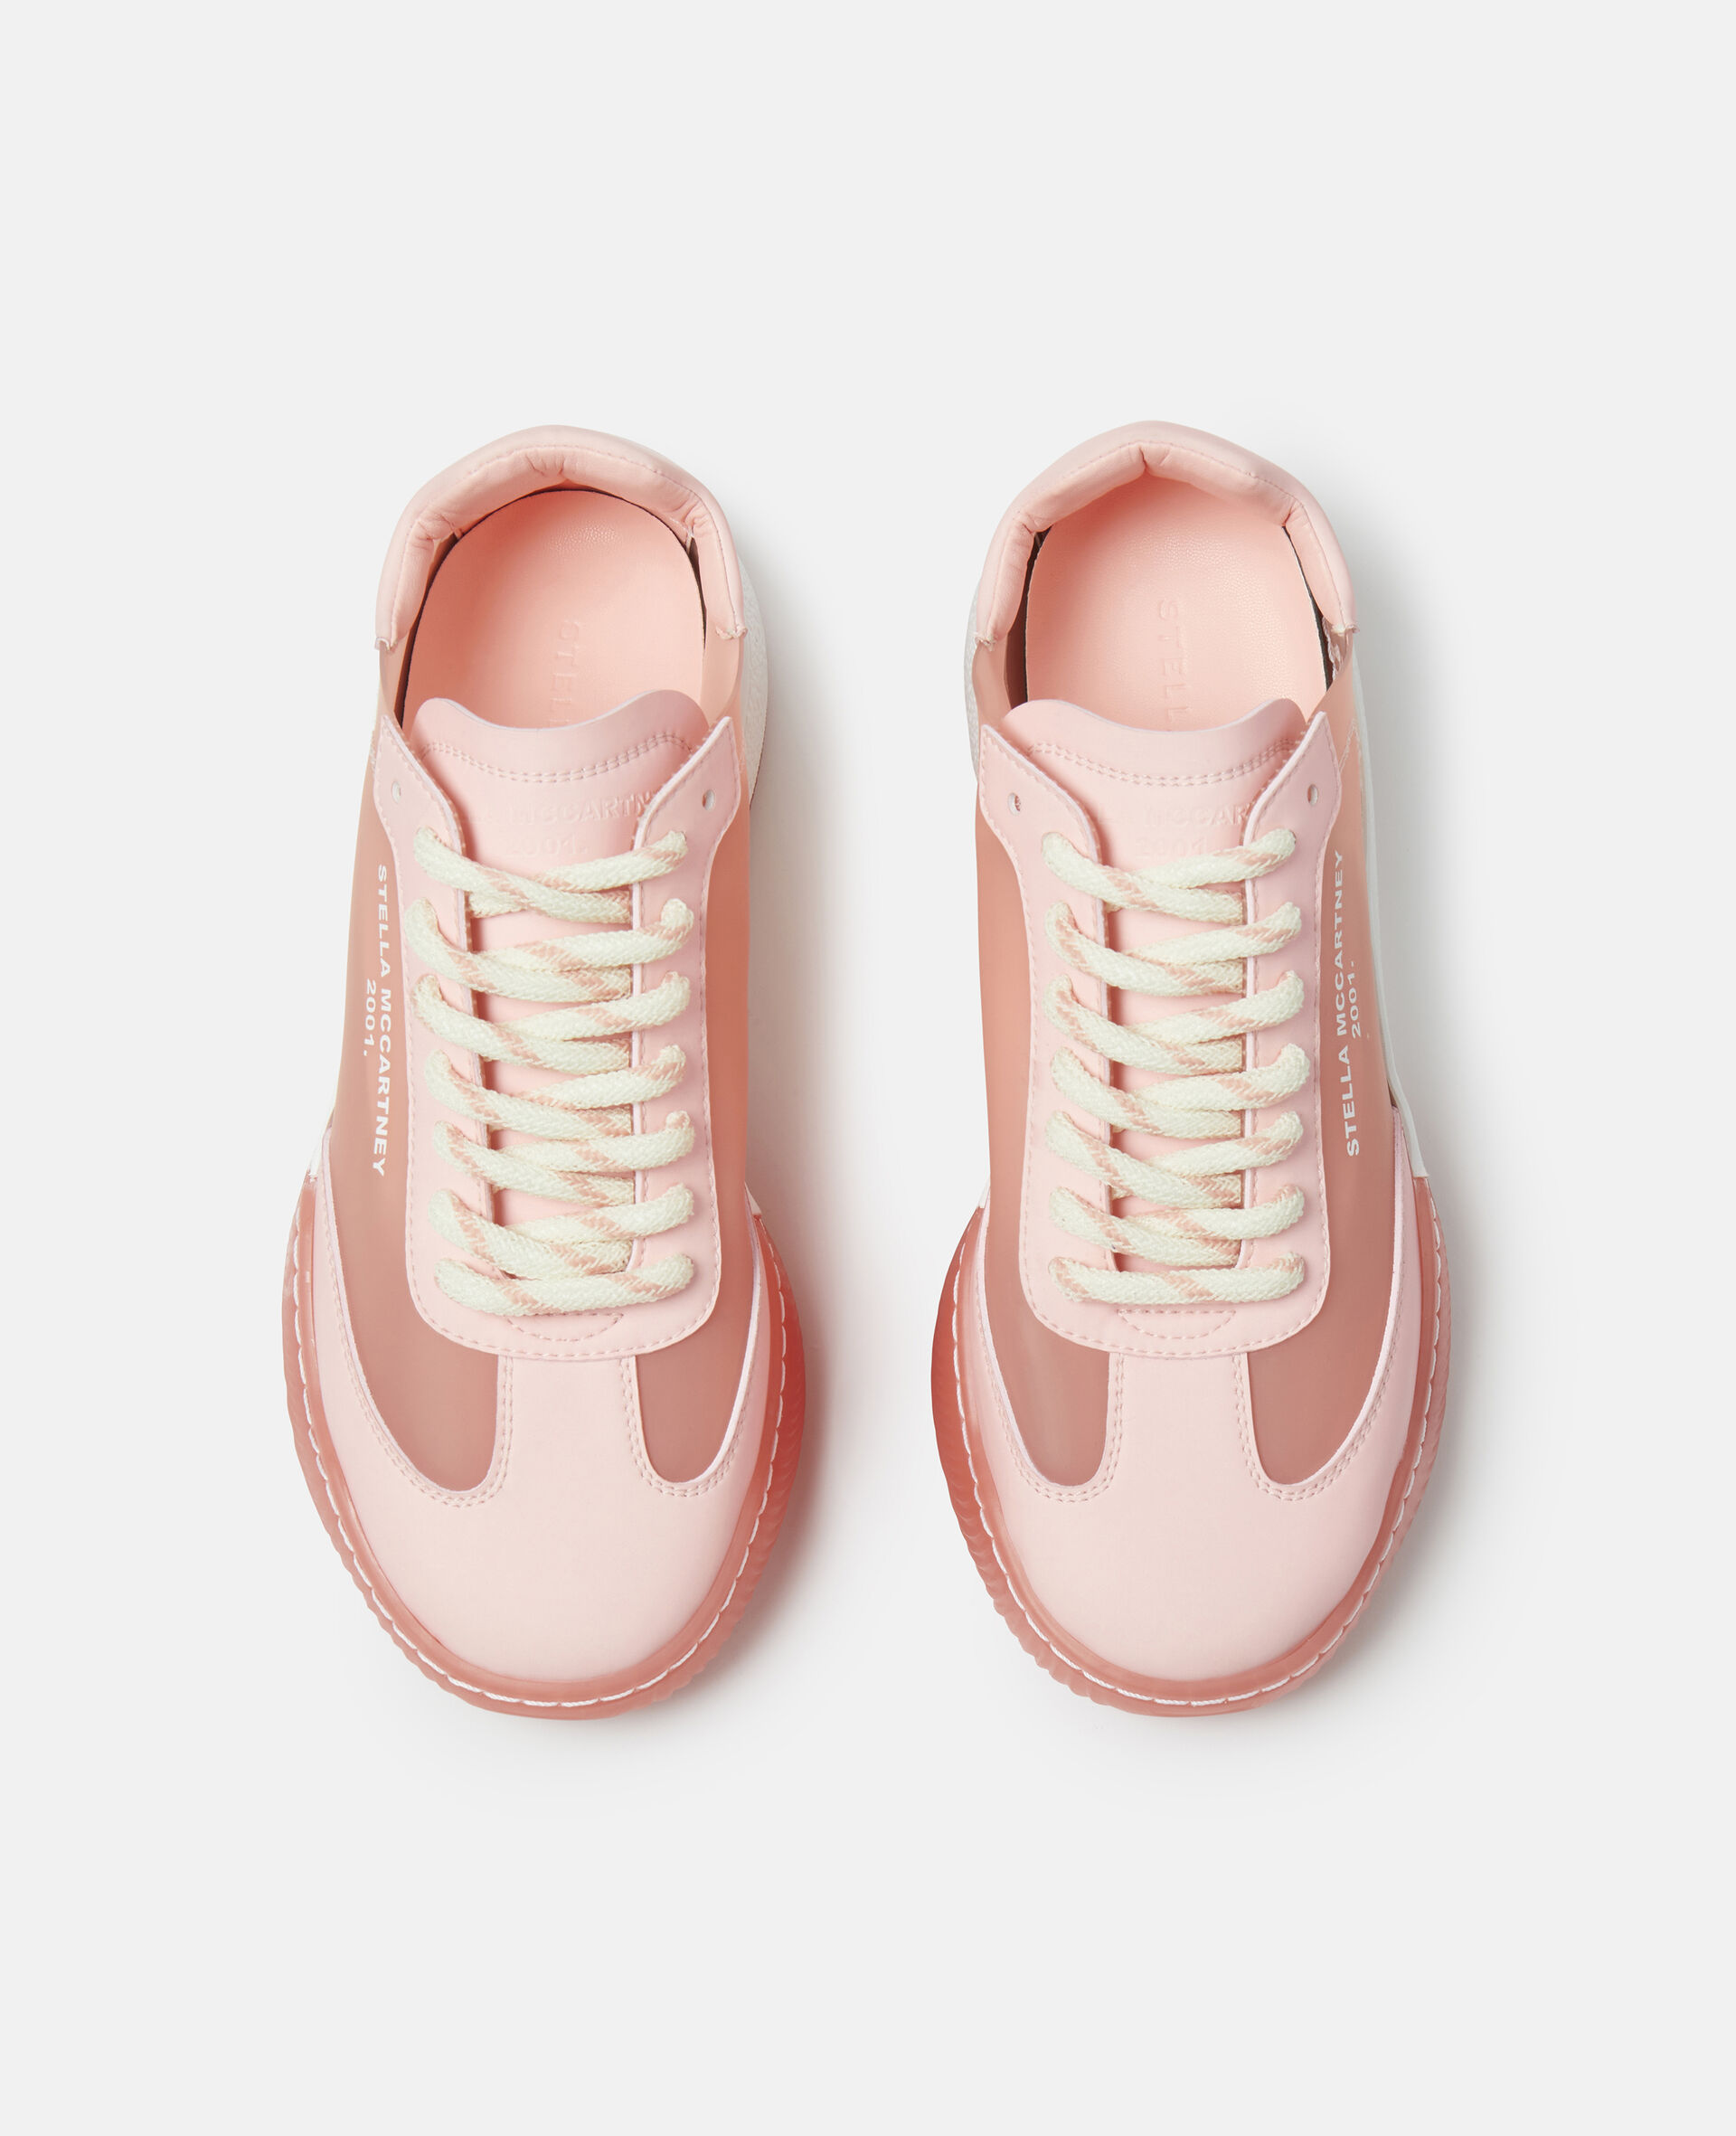 Loop Lace-Up Sneakers-Rose-large image number 3